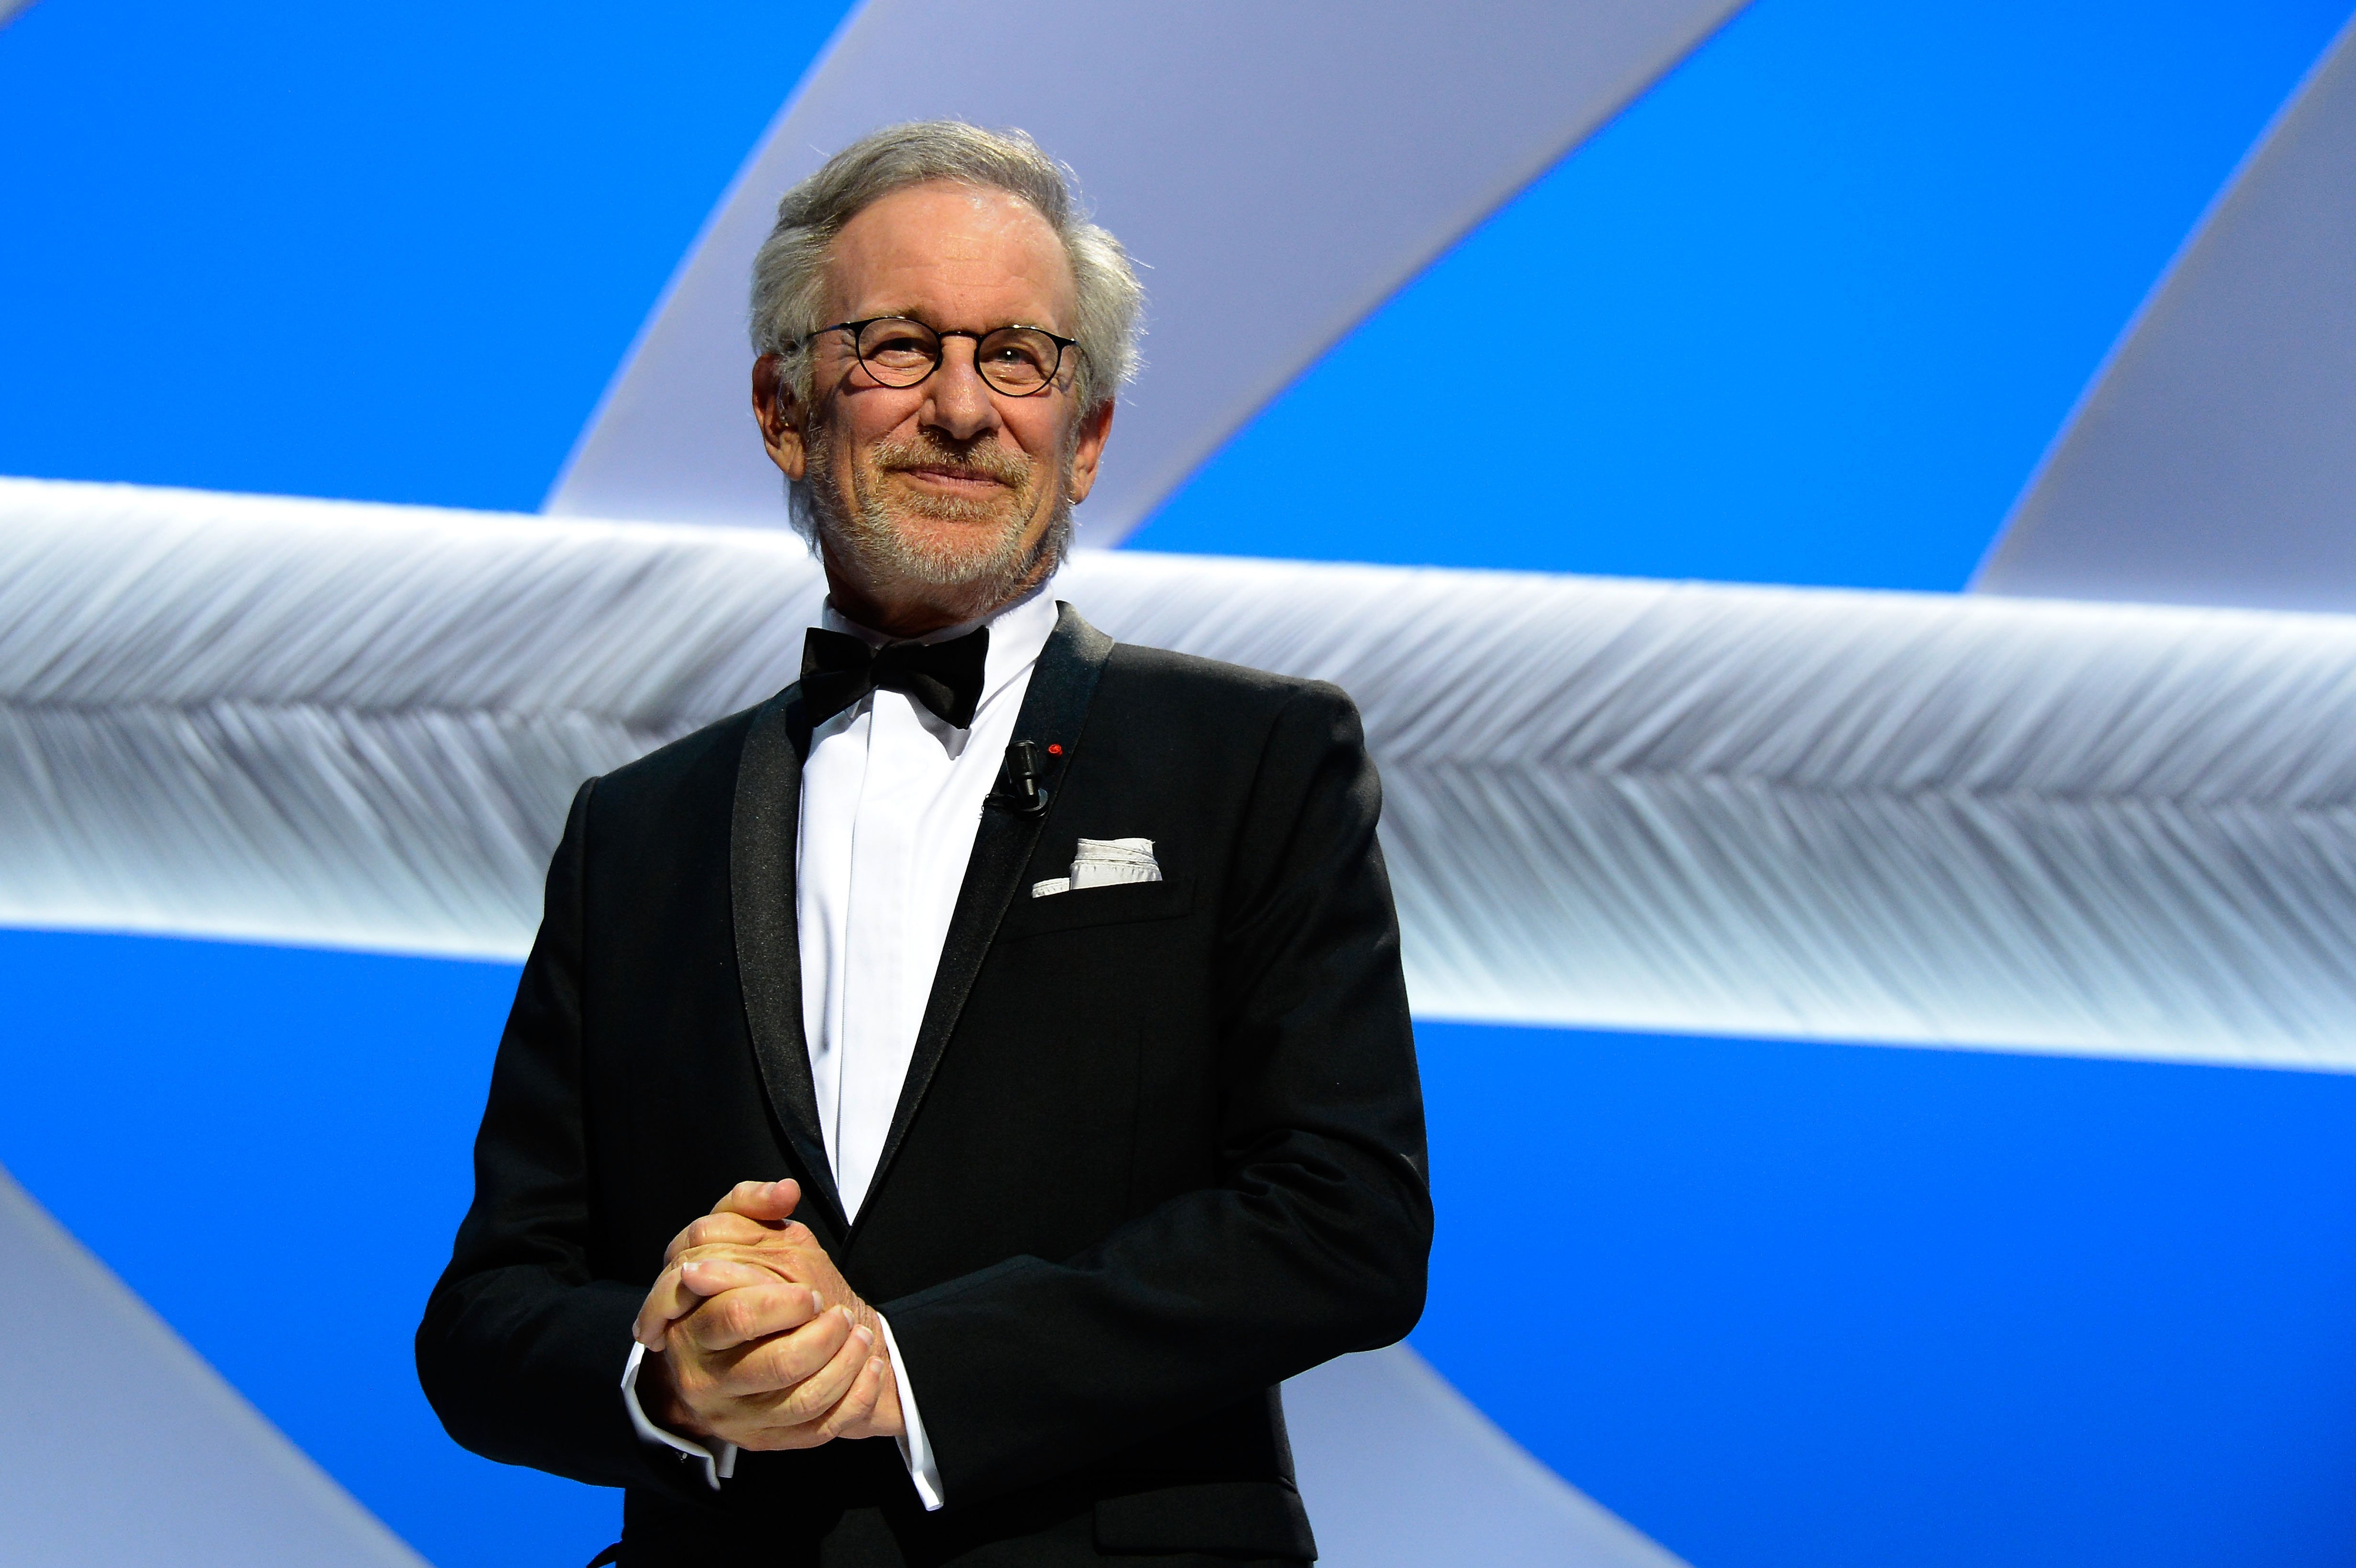 Steven Spielberg takes the stage in France 